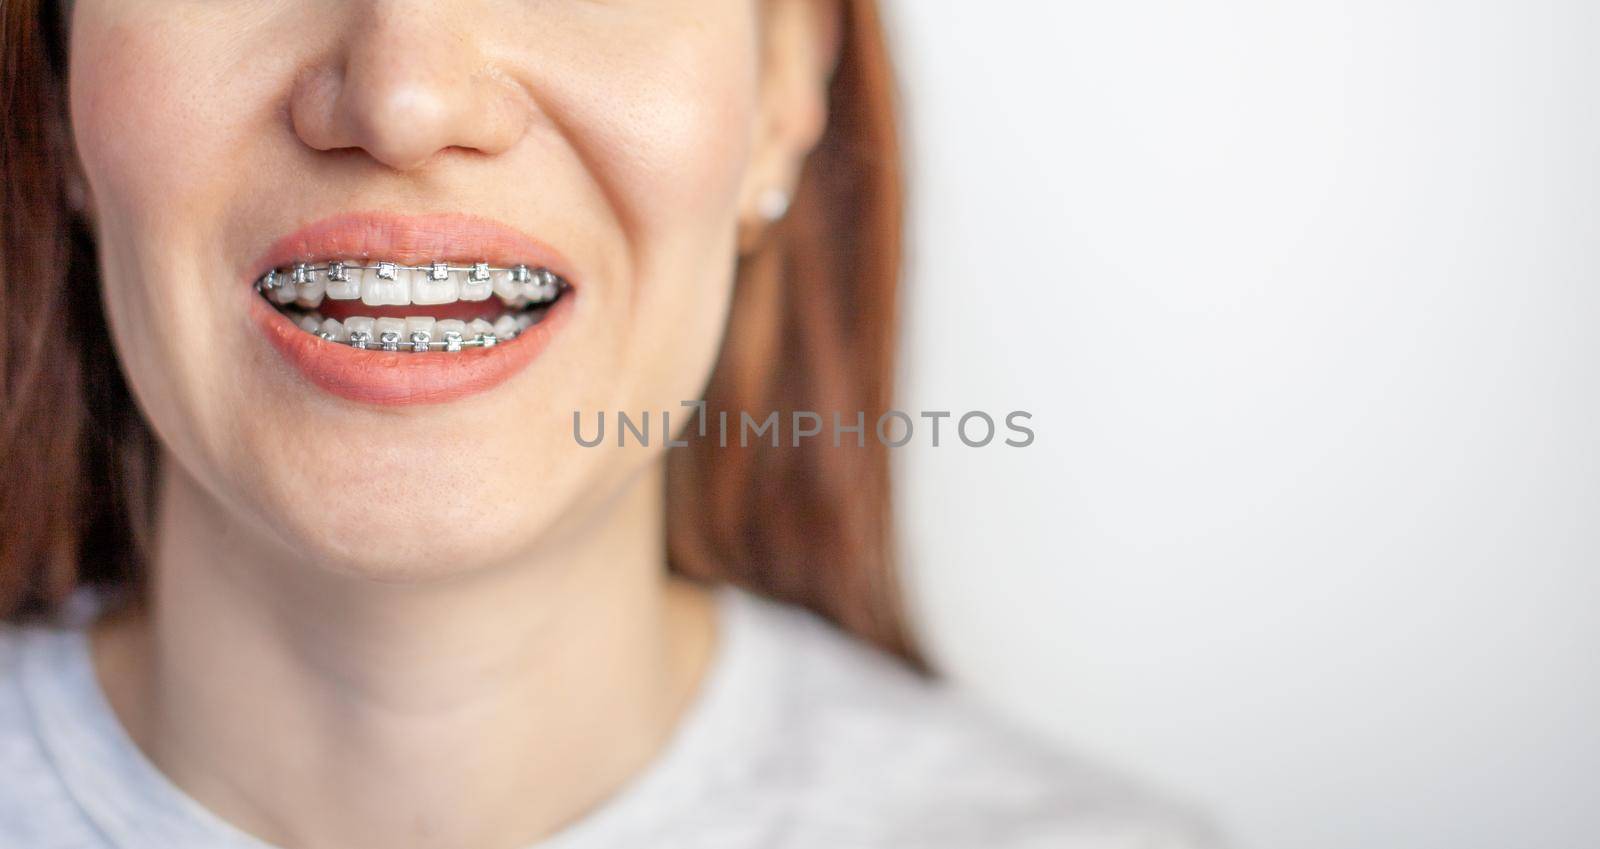 The smile of a young girl with braces on her white teeth. Teeth straightening. Malocclusion. Dental care. 